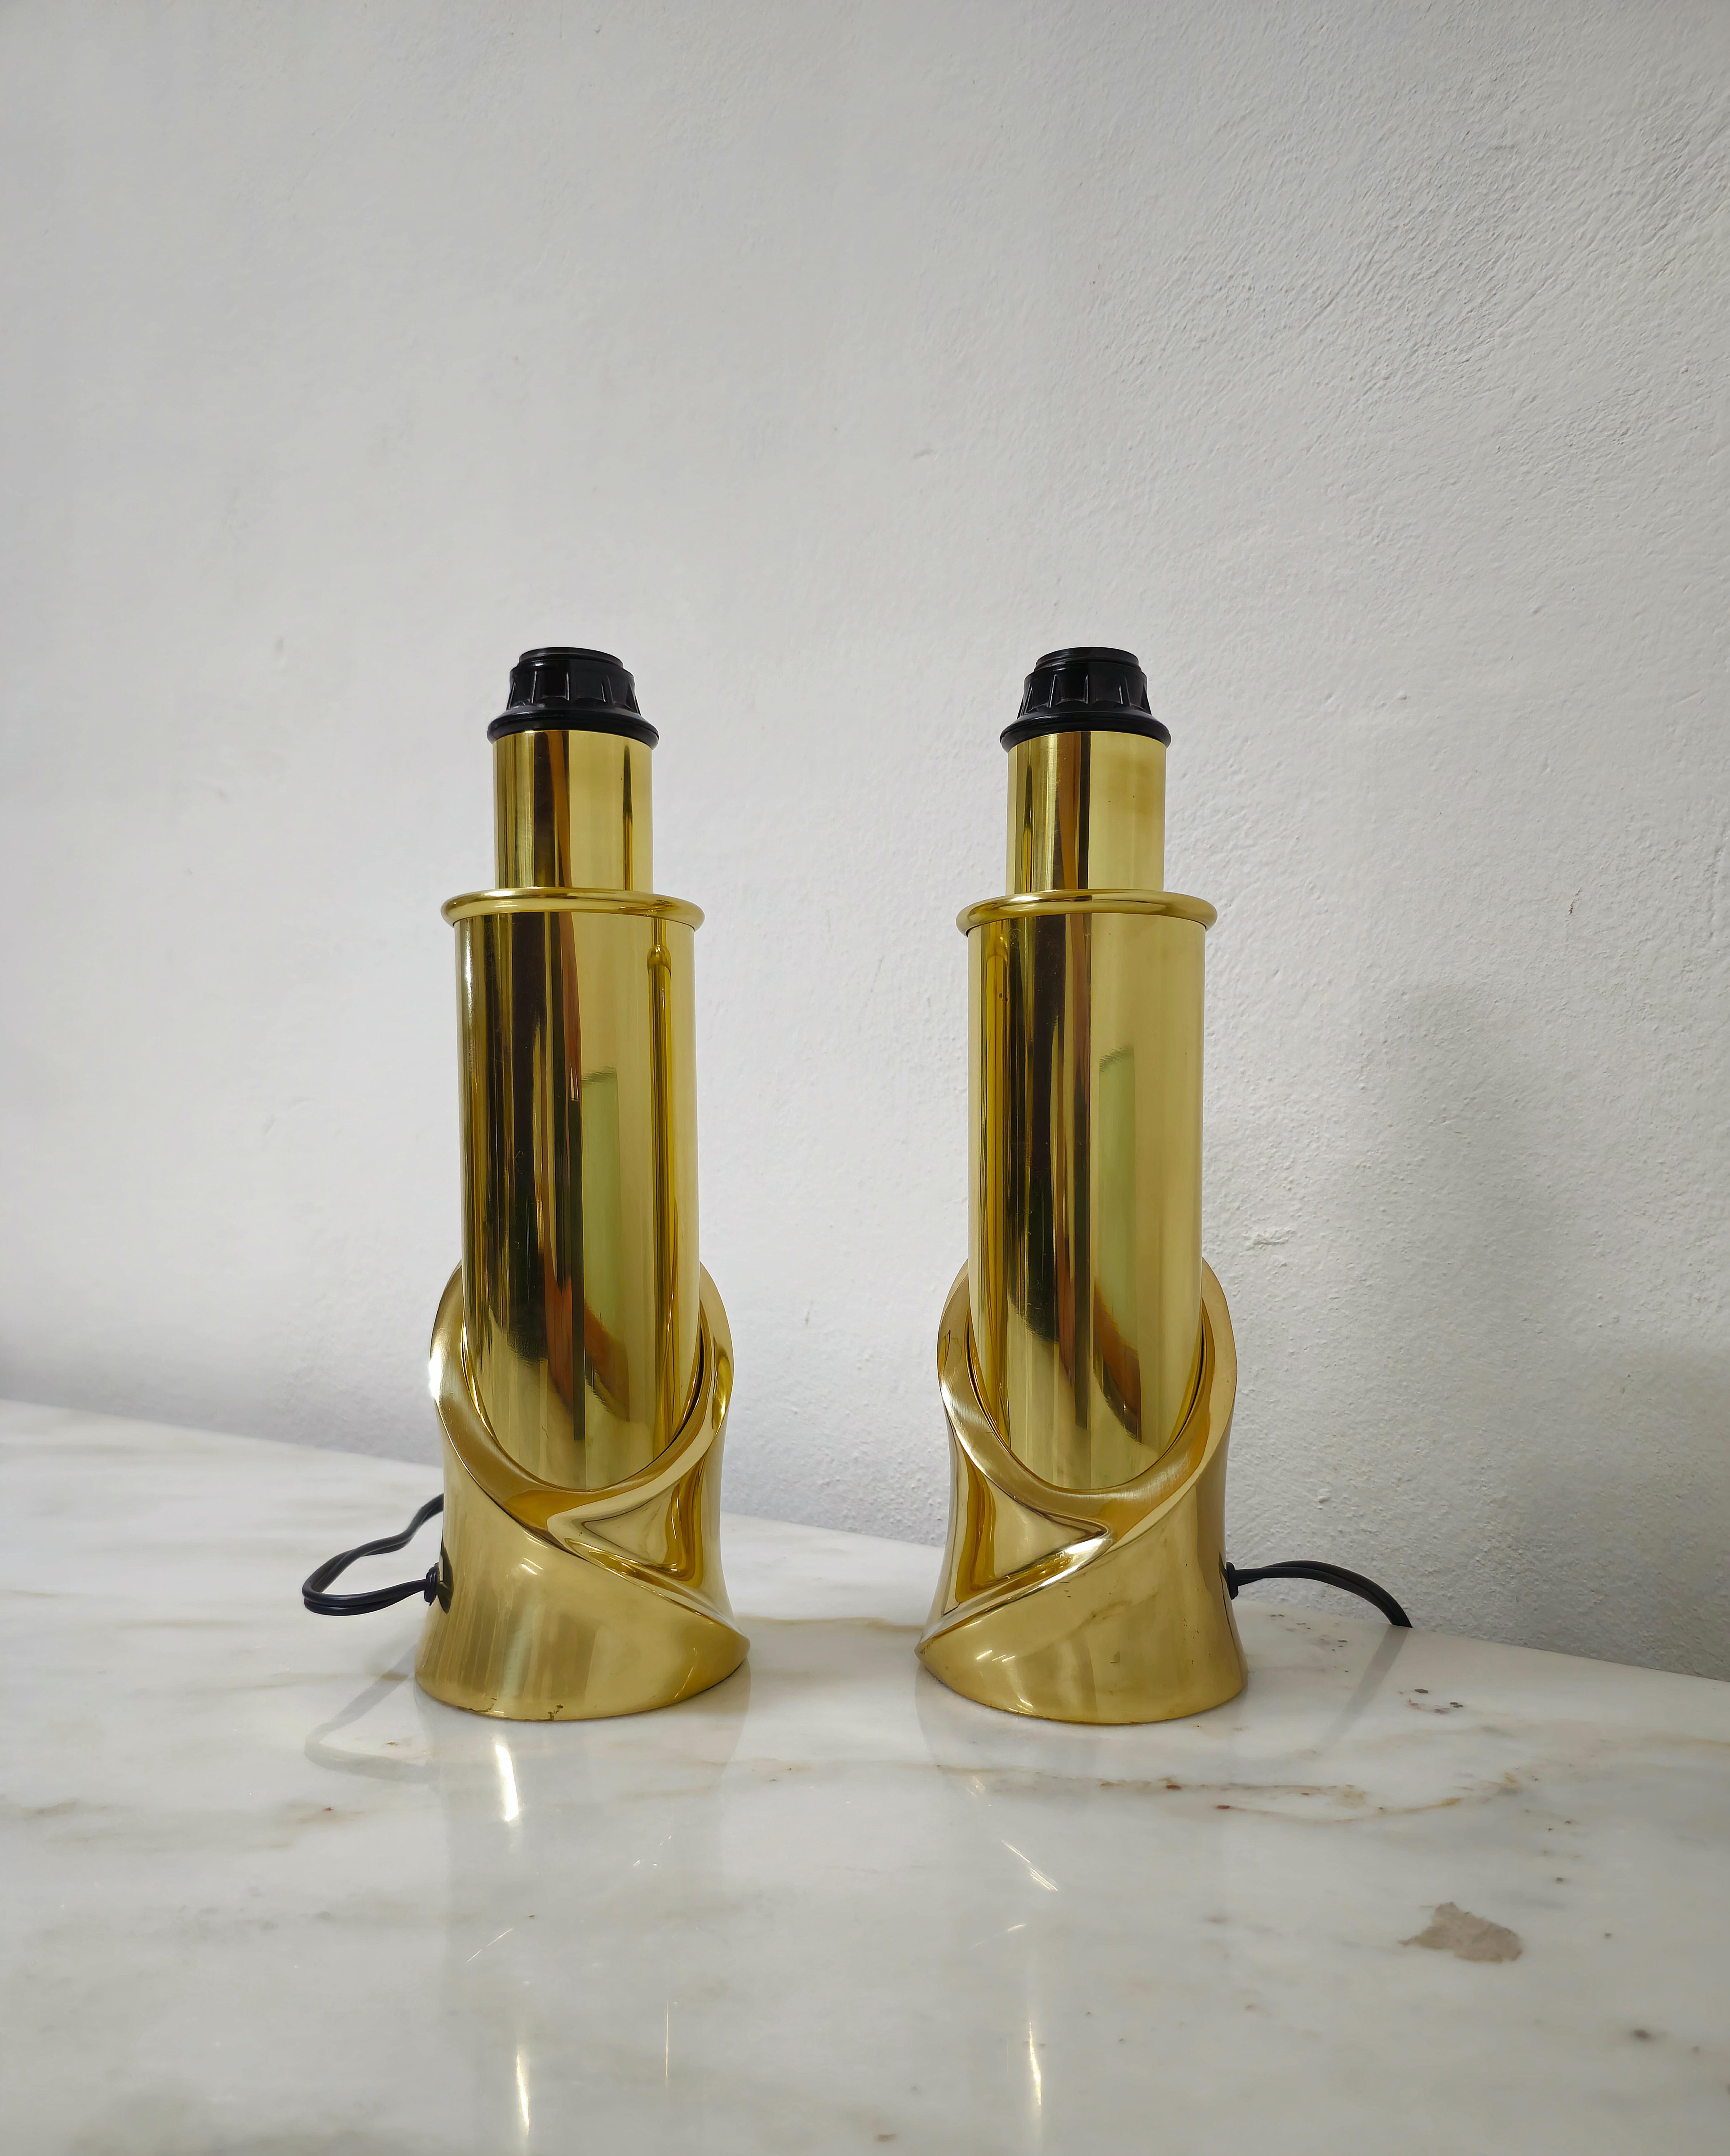 Pair of Table Lamps Bedside Lamps Brass Luciano Frigerio Italian Design 1970s  For Sale 3